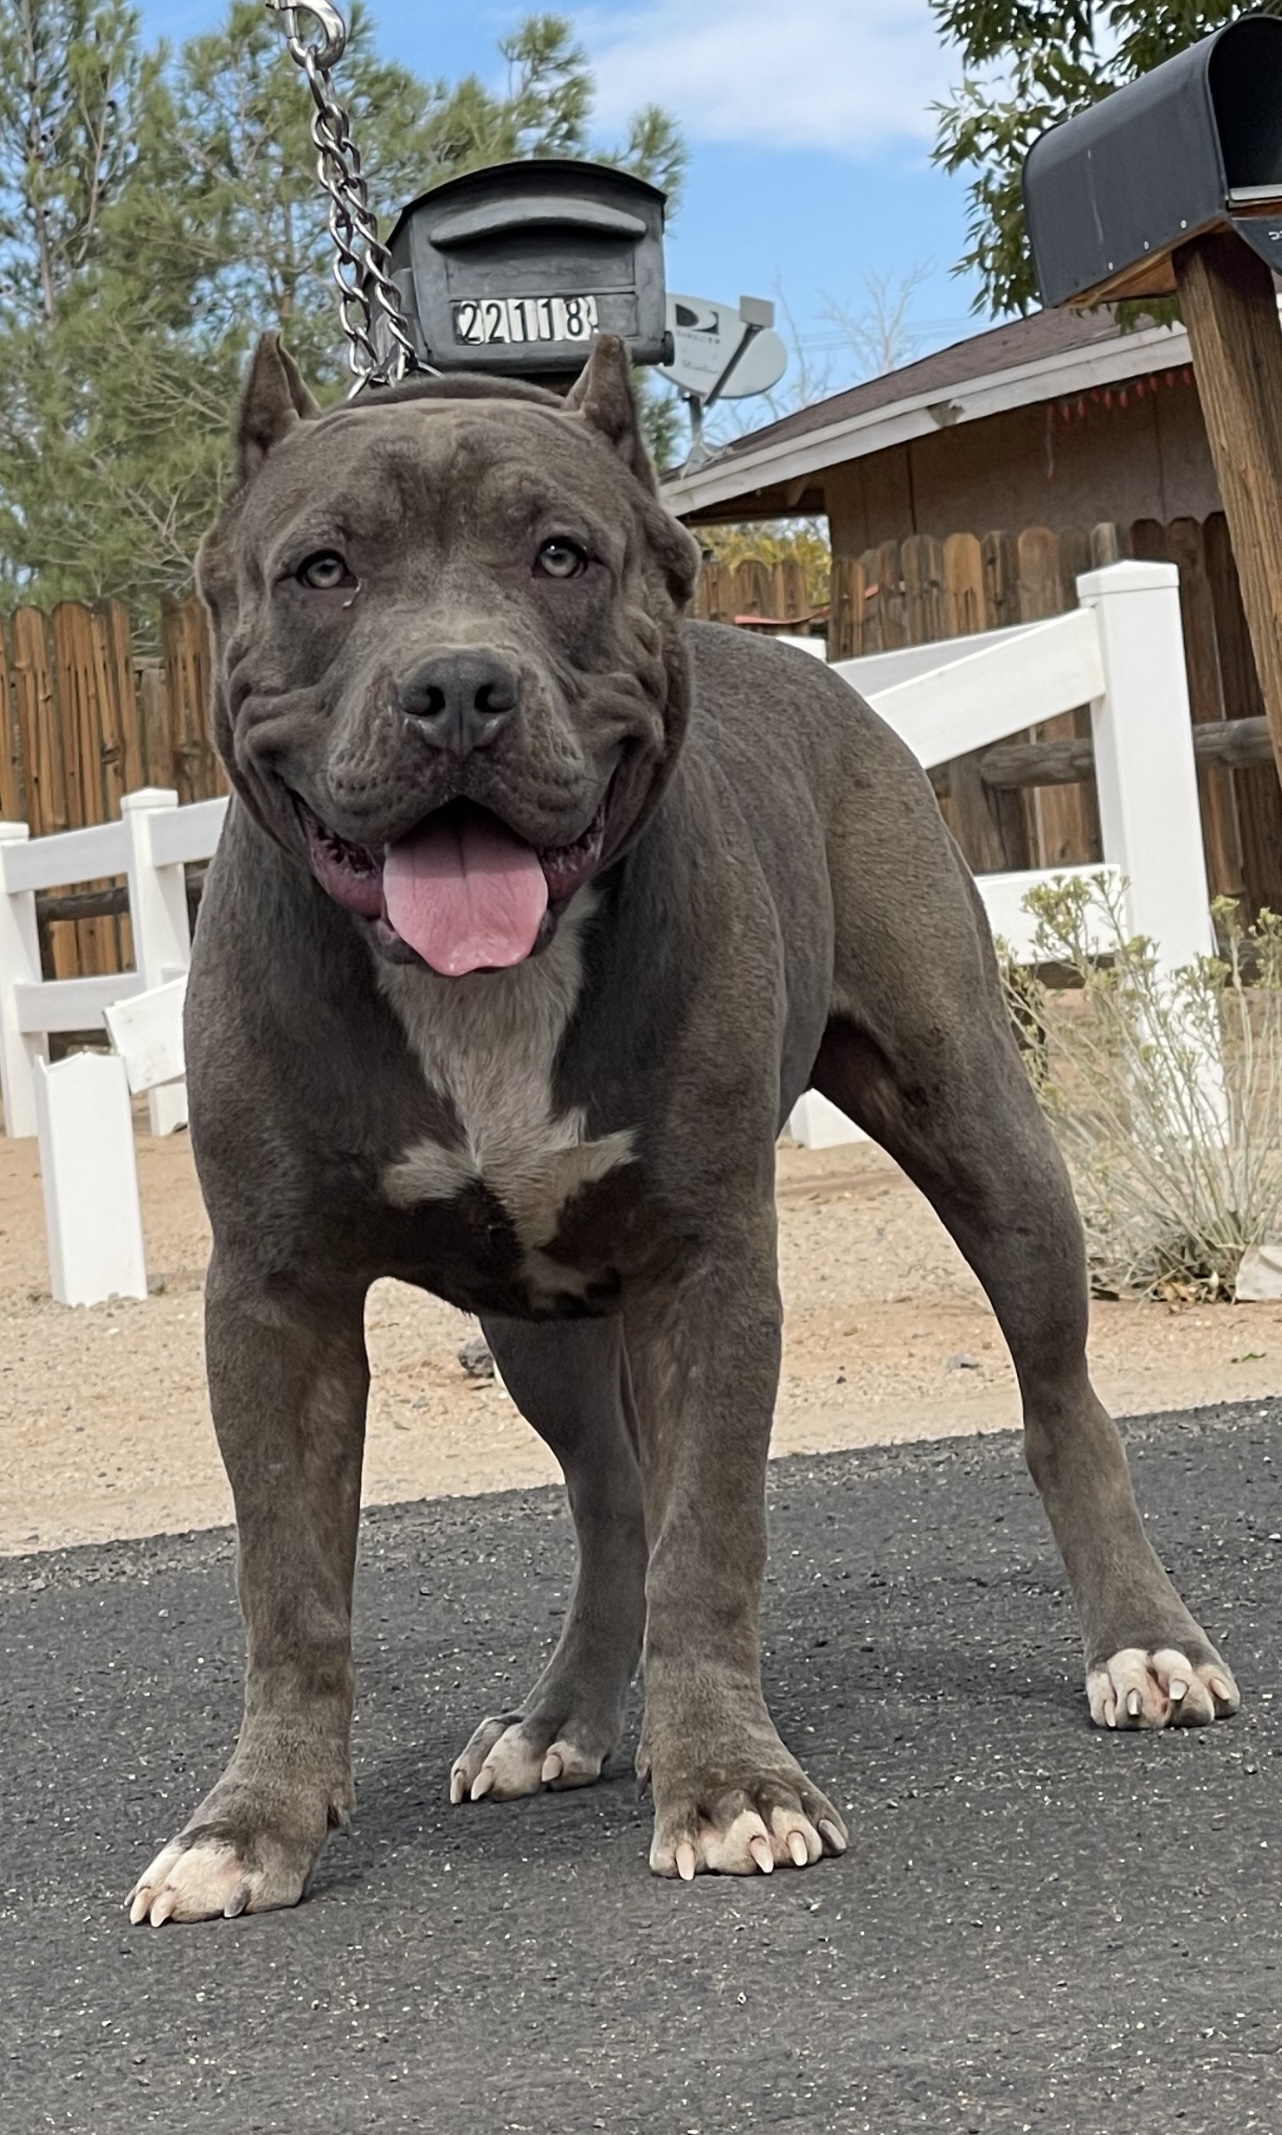 Louis V Gottyline short muscle bloodline open for stud fee or pup back :  r/AmericanBully